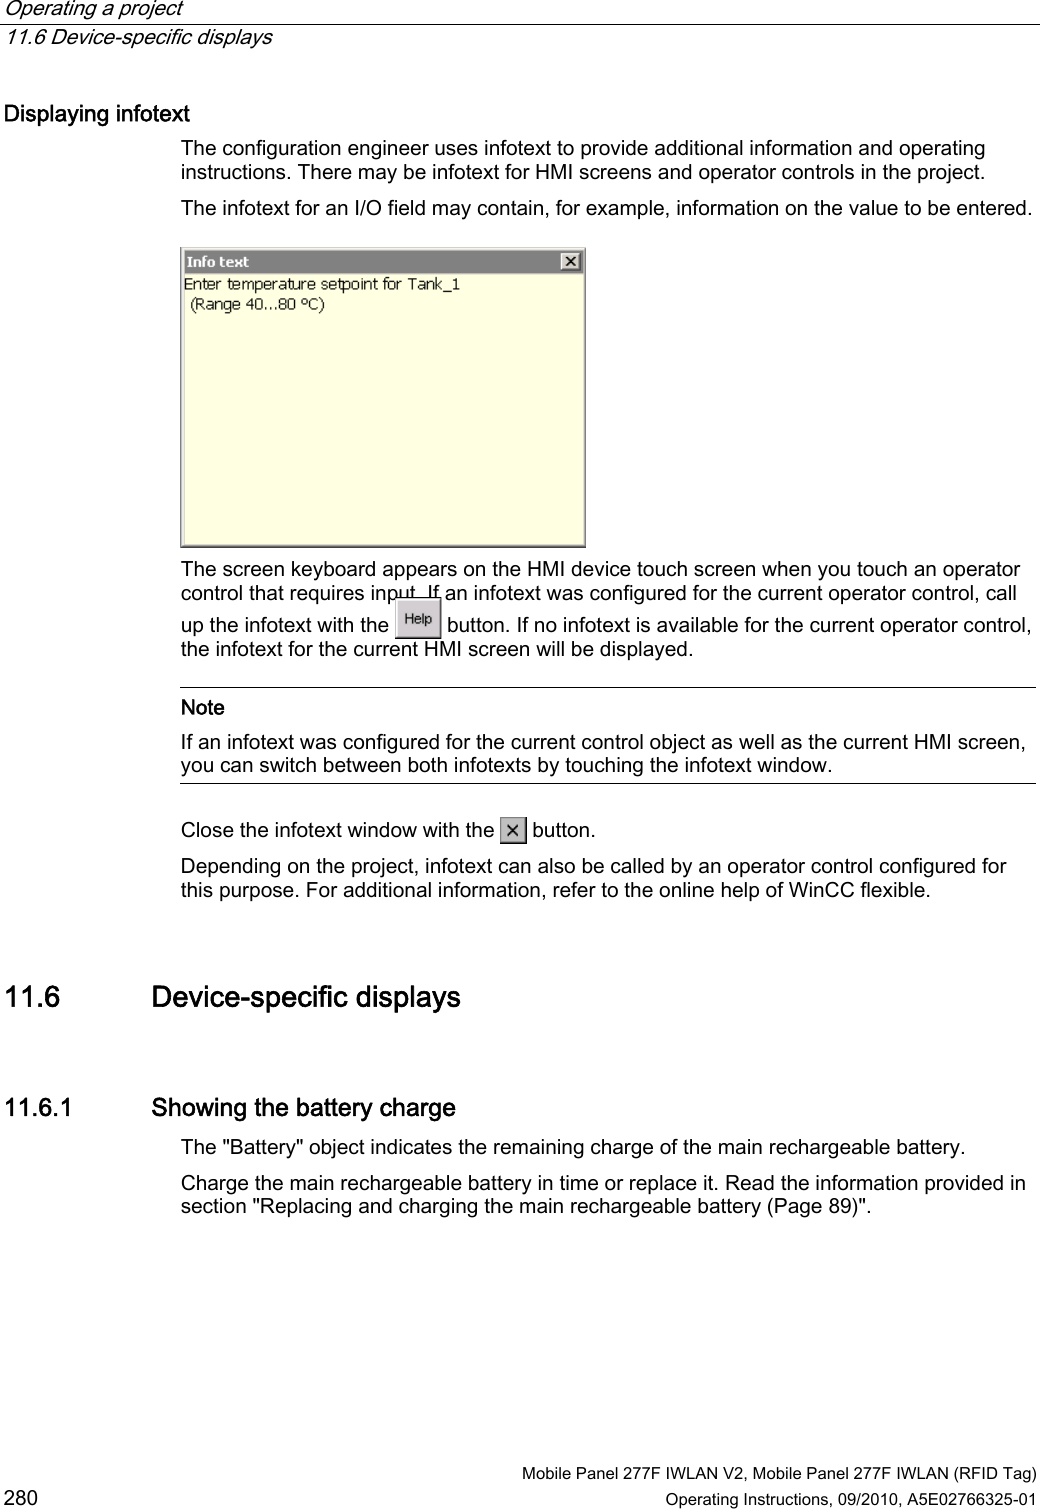 Operating a project   11.6 Device-specific displays   Mobile Panel 277F IWLAN V2, Mobile Panel 277F IWLAN (RFID Tag) 280 Operating Instructions, 09/2010, A5E02766325-01 Displaying infotext  The configuration engineer uses infotext to provide additional information and operating instructions. There may be infotext for HMI screens and operator controls in the project. The infotext for an I/O field may contain, for example, information on the value to be entered.  The screen keyboard appears on the HMI device touch screen when you touch an operator control that requires input. If an infotext was configured for the current operator control, call up the infotext with the   button. If no infotext is available for the current operator control, the infotext for the current HMI screen will be displayed.   Note If an infotext was configured for the current control object as well as the current HMI screen, you can switch between both infotexts by touching the infotext window.  Close the infotext window with the   button. Depending on the project, infotext can also be called by an operator control configured for this purpose. For additional information, refer to the online help of WinCC flexible. 11.6 Device-specific displays 11.6.1 Showing the battery charge The &quot;Battery&quot; object indicates the remaining charge of the main rechargeable battery.  Charge the main rechargeable battery in time or replace it. Read the information provided in section &quot;Replacing and charging the main rechargeable battery (Page 89)&quot;. REVIEW ENGLISH 27.07.2010